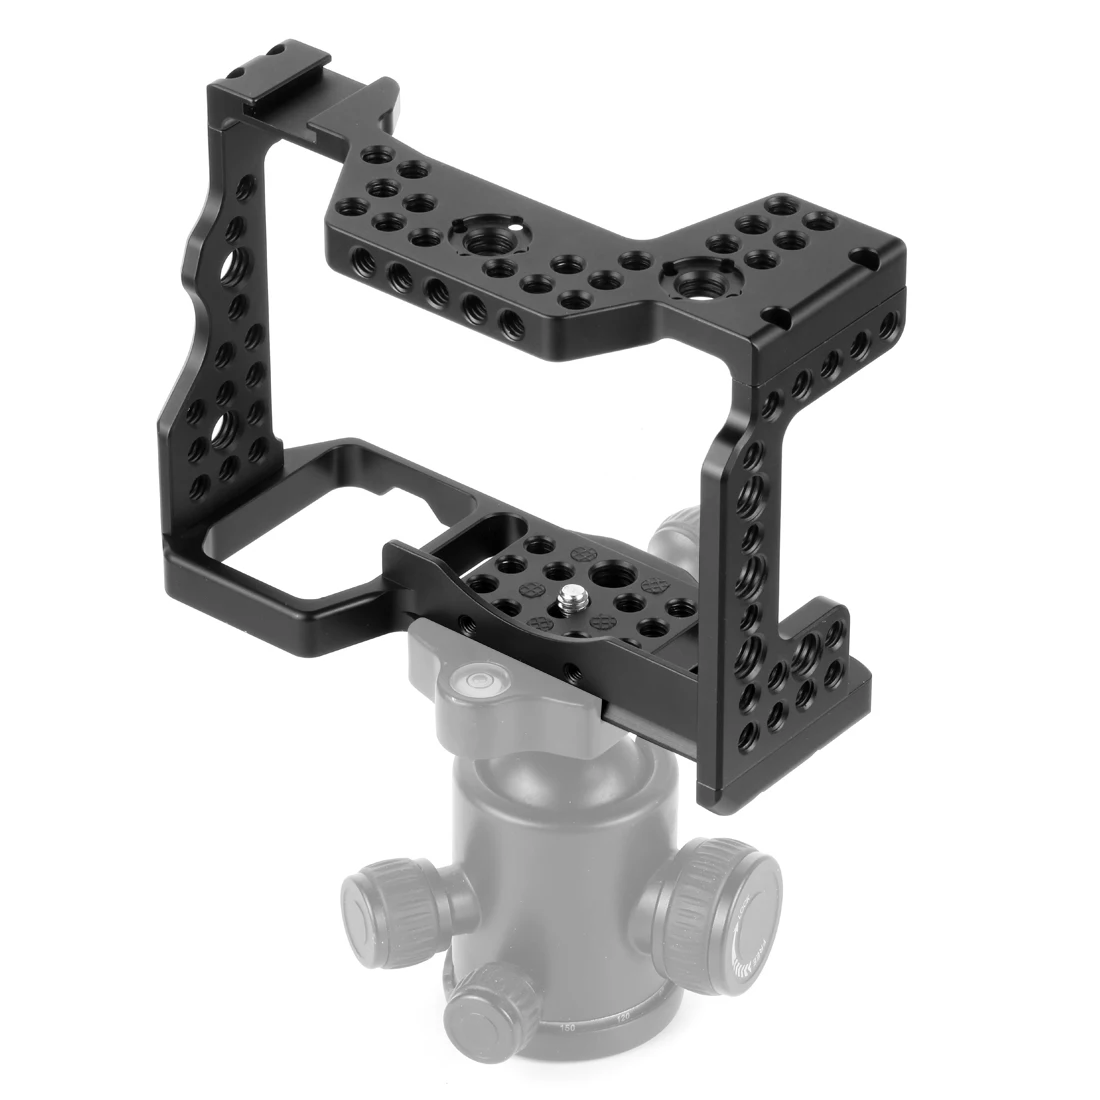 

OEM/ODM Standard Cold Shoe Camera Cage DSLR For Sony A7 iii A7M3 A7R3 Camera Accessories, Black